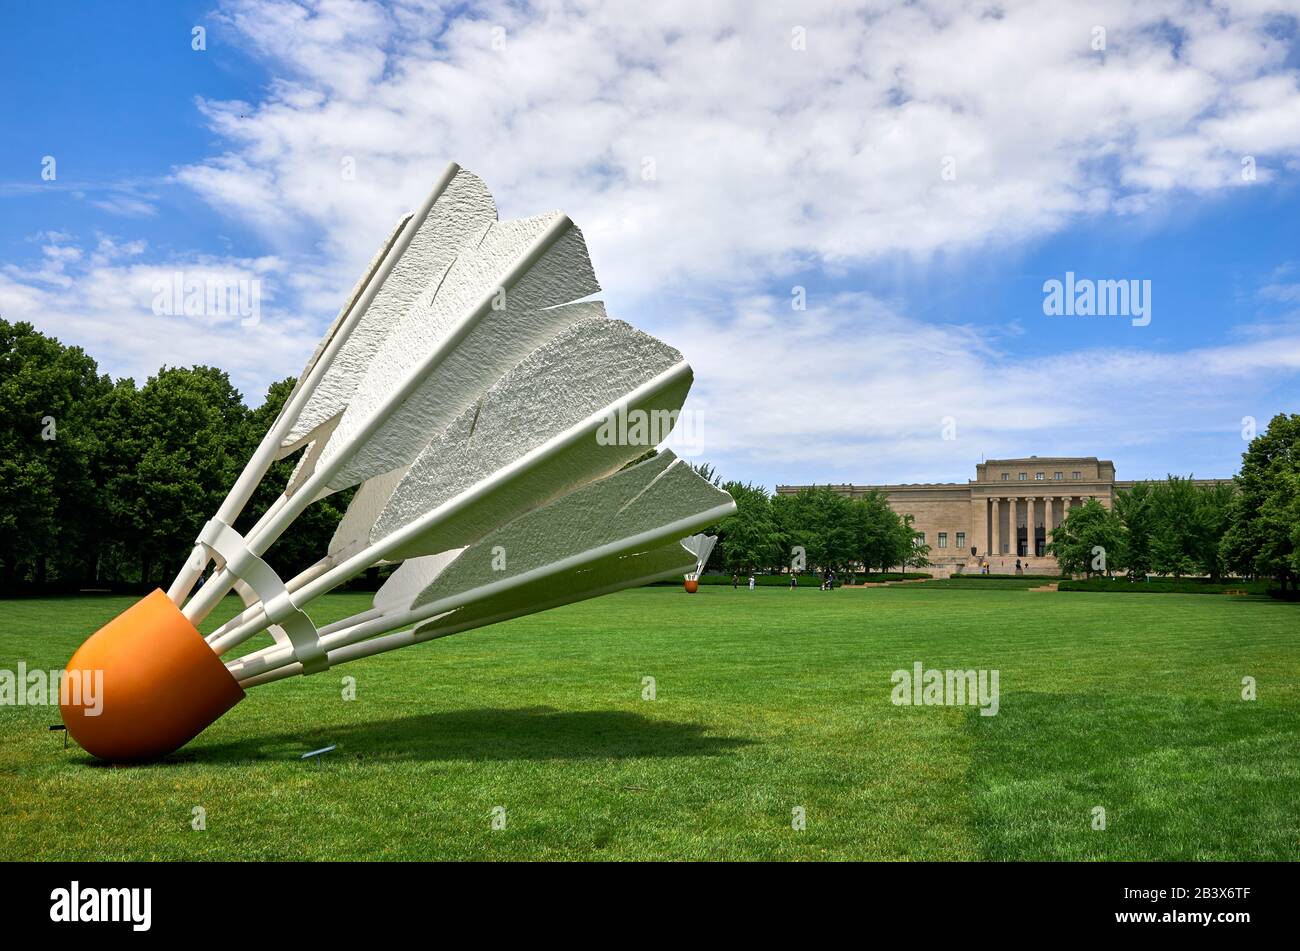 Shuttlecocks by Claes Oldenburg in the Sculpture Park at The Nelson Atkins Museum of Art in KC. Stock Photo